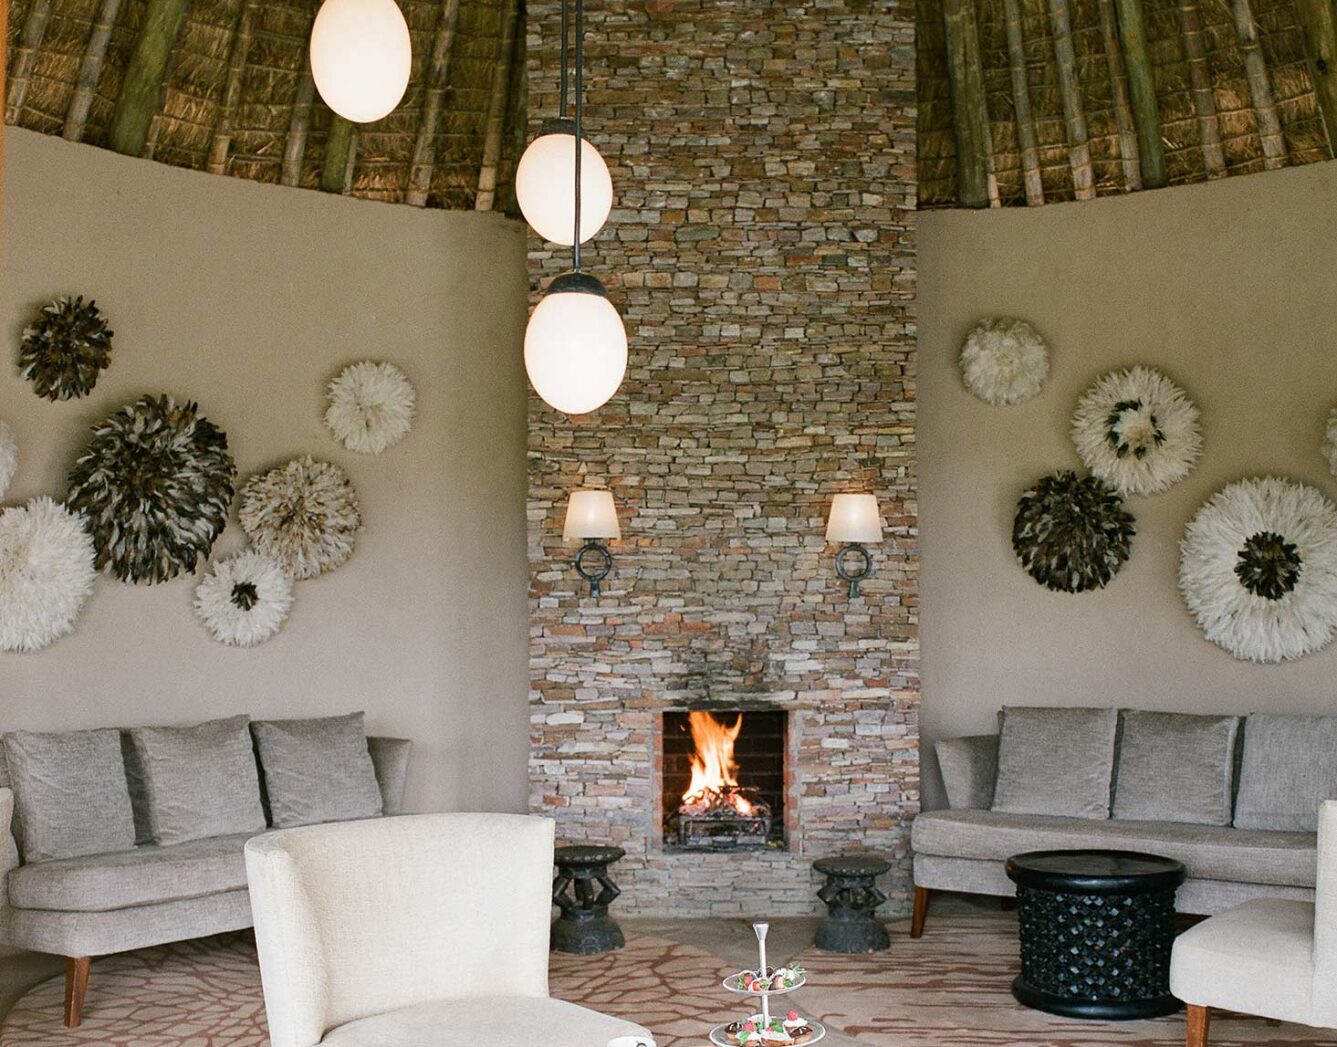 A white chair beside a coffee table with a stone fireplace in the background